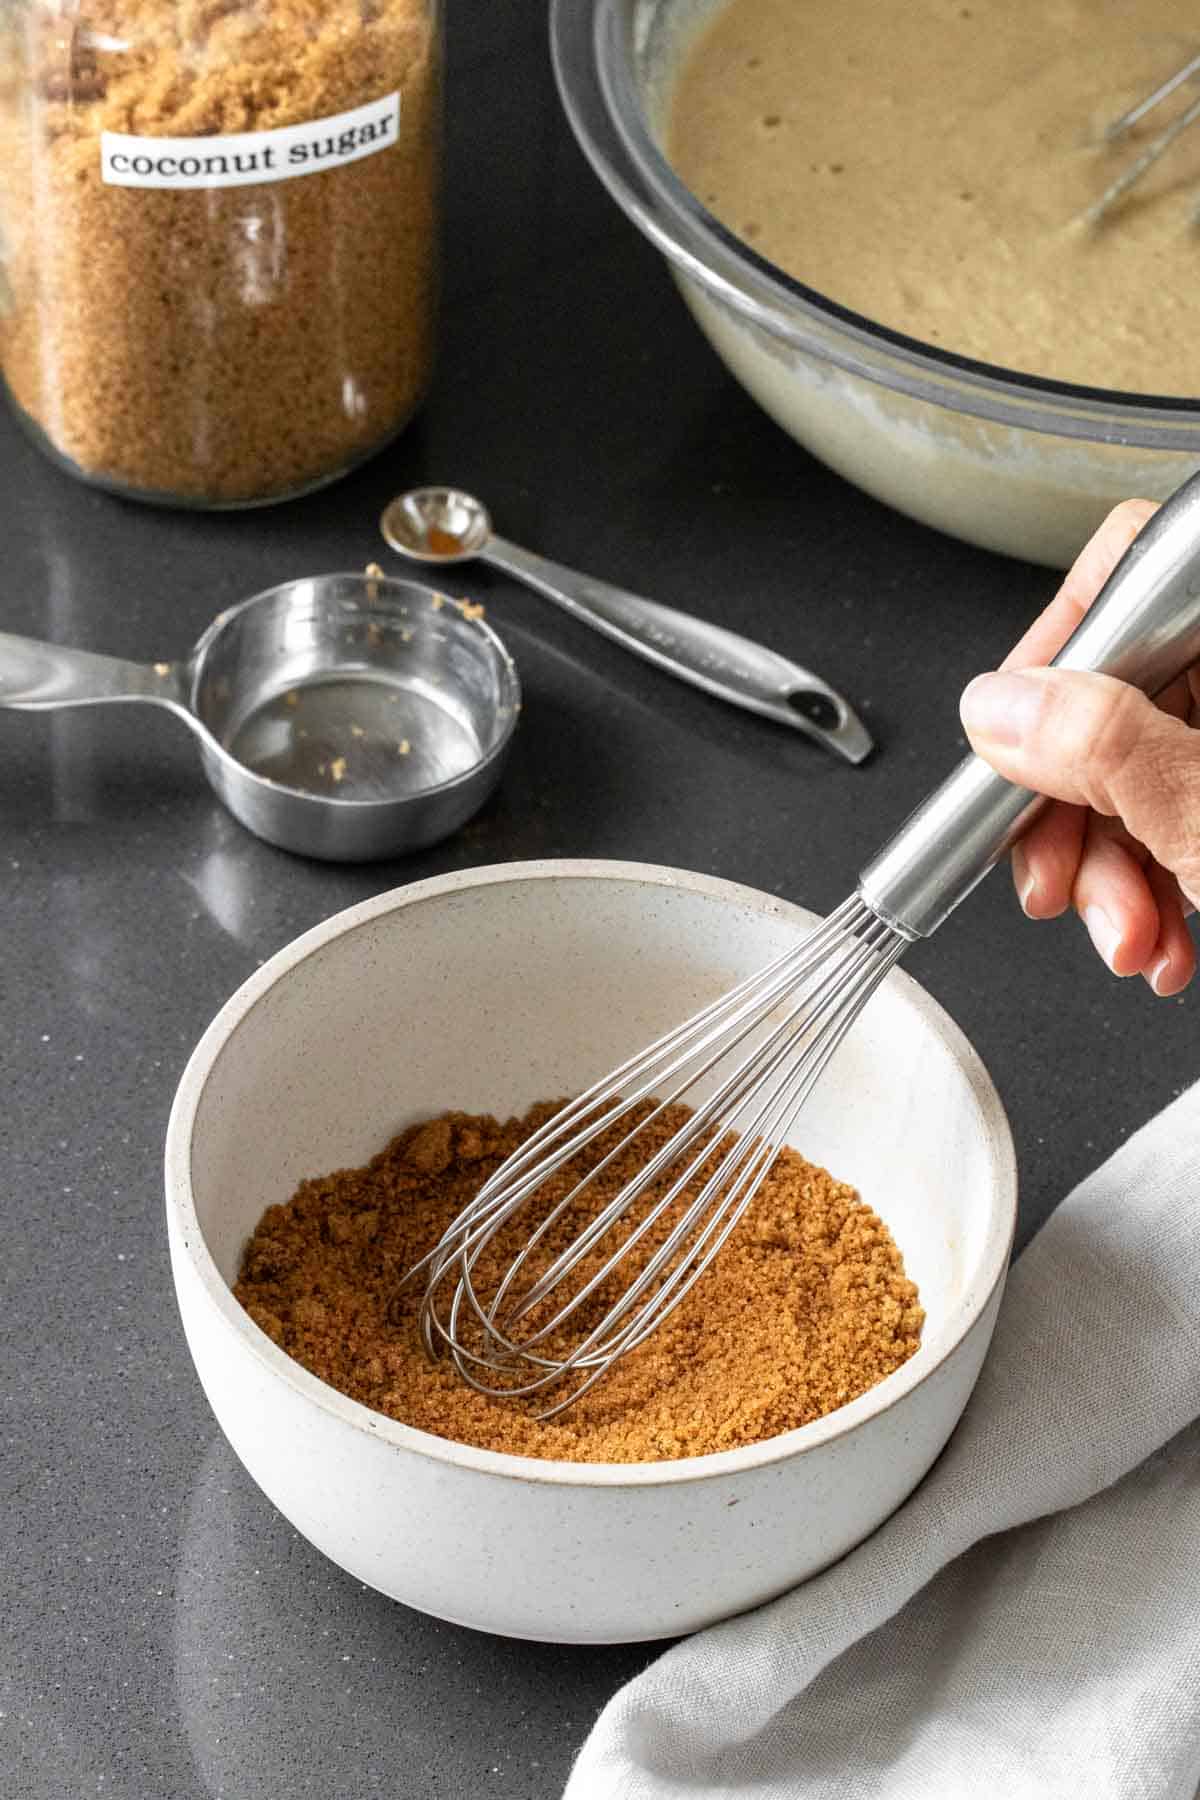 A hand with a whisk mixing brown sugar in a white bowl in front of a bowl of cake batter.